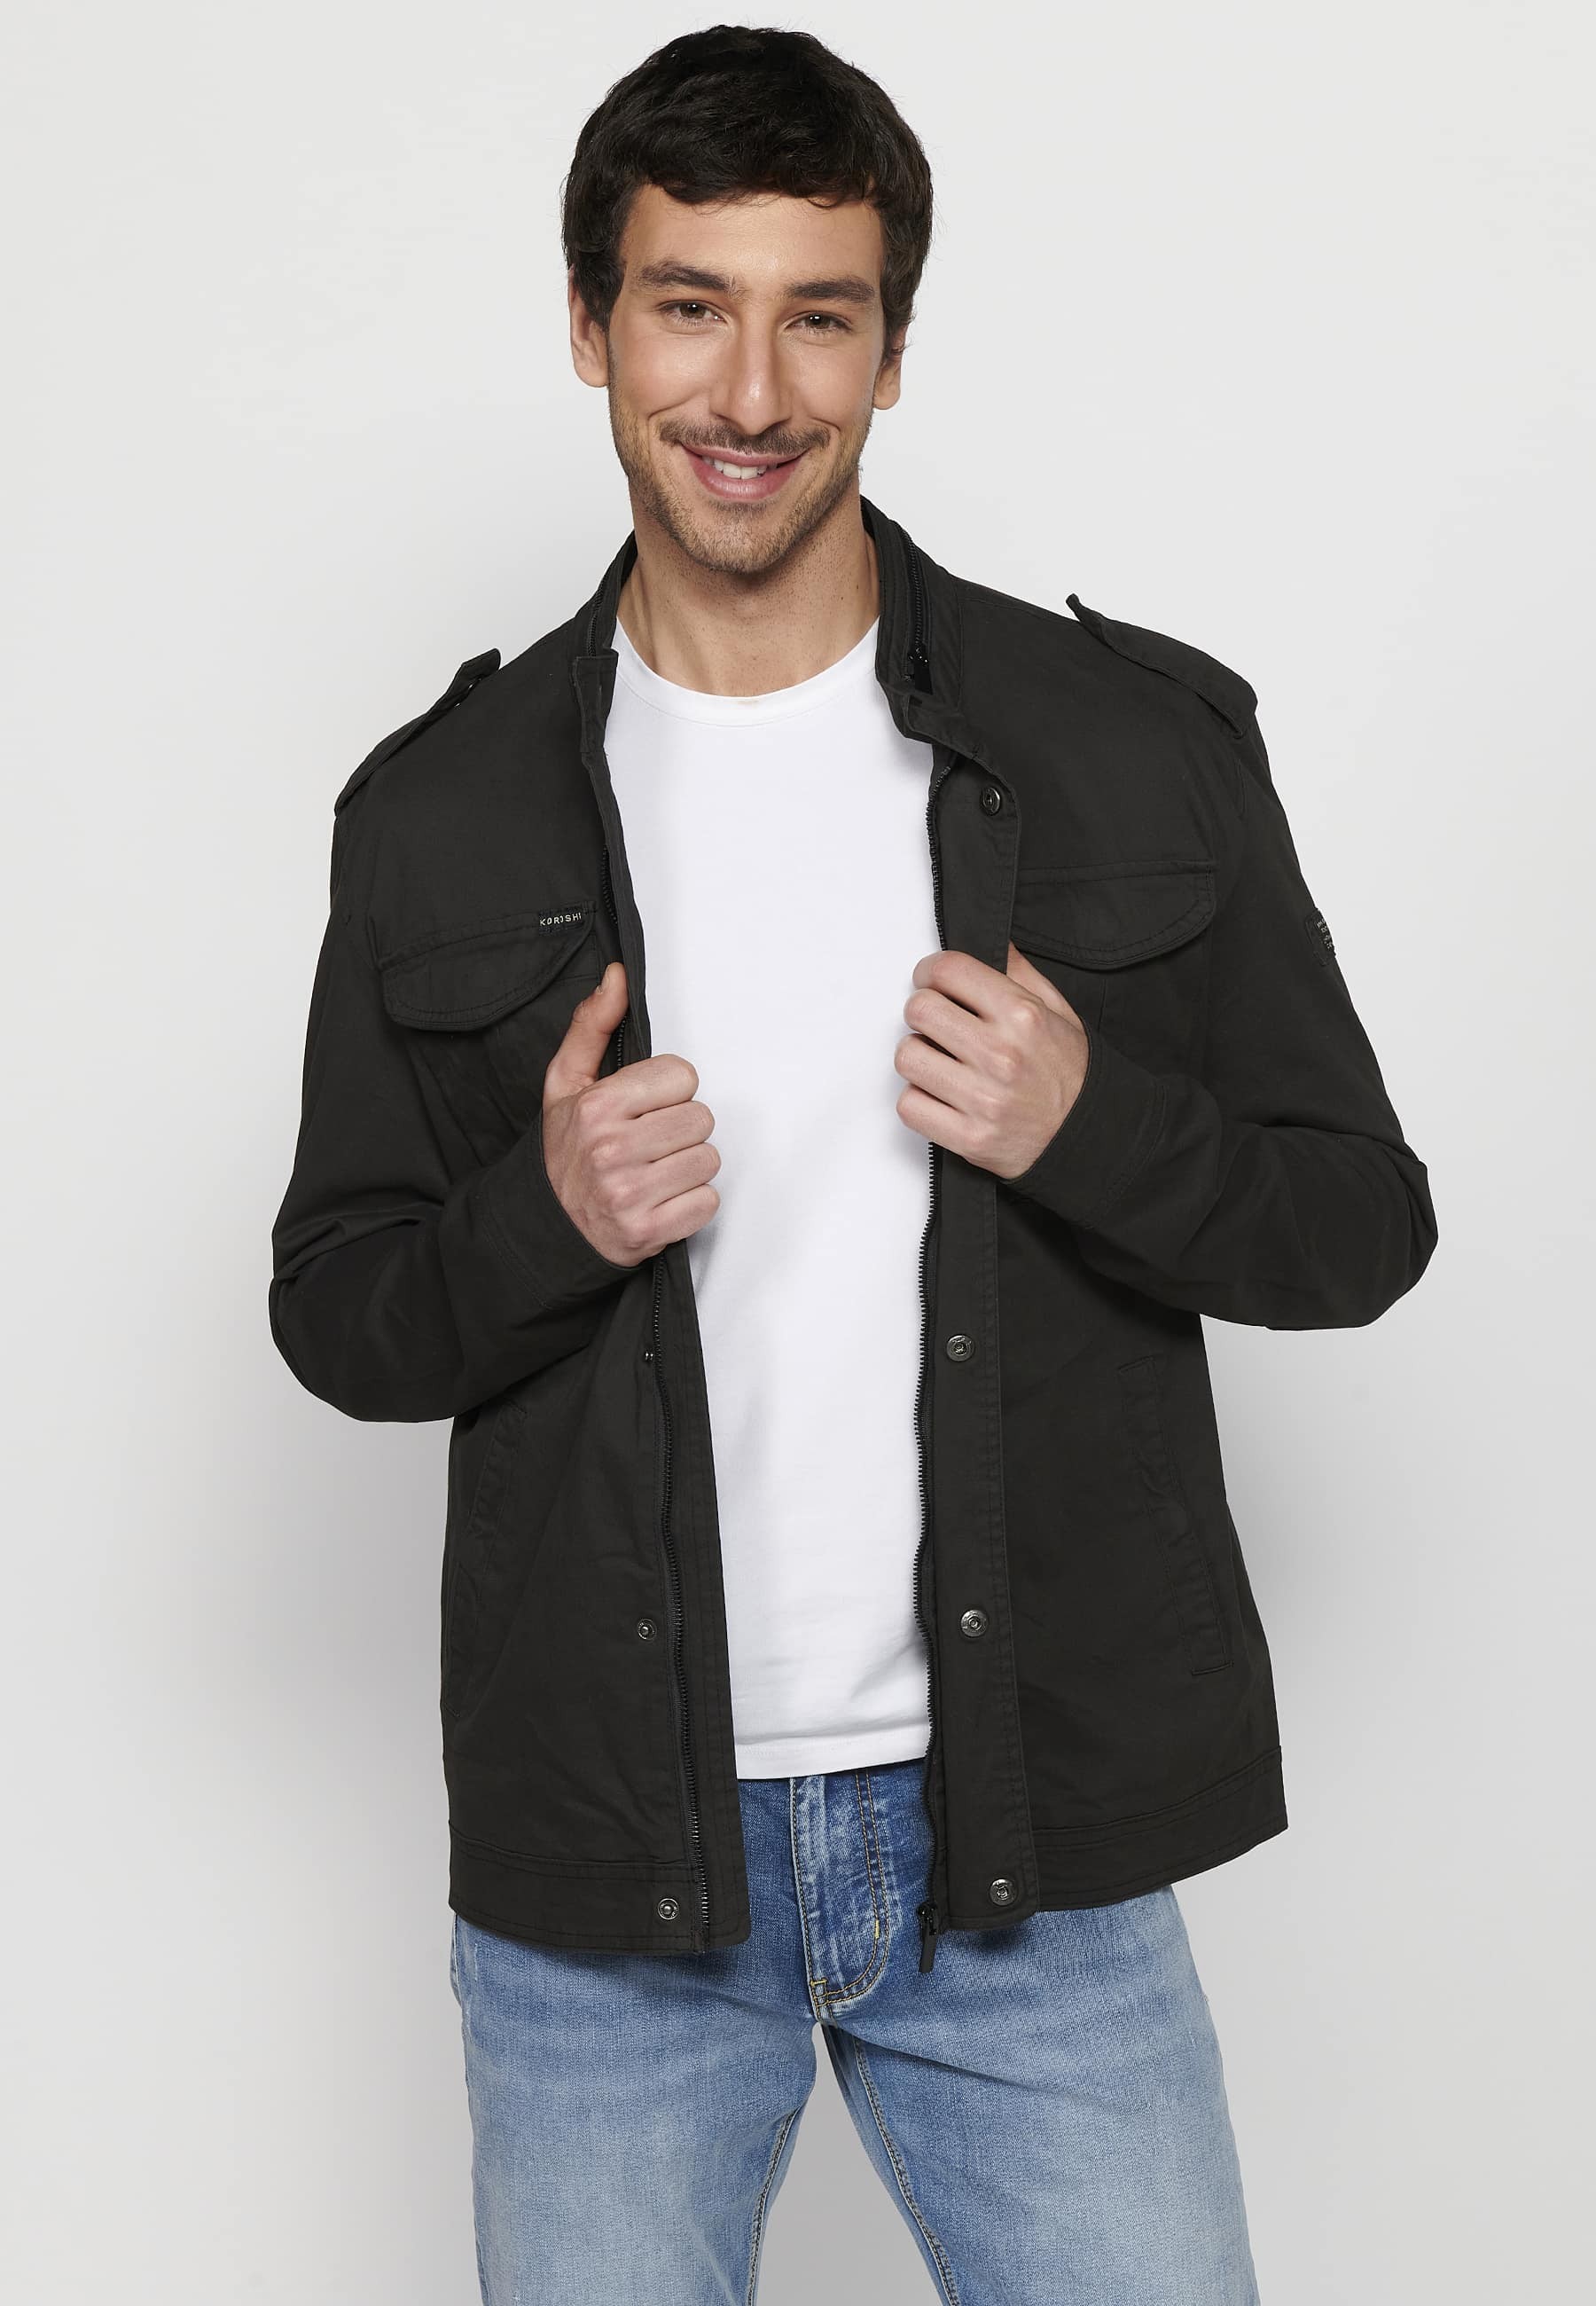 Long-sleeved jacket with high collar and front zipper closure with pockets in black for men. 7